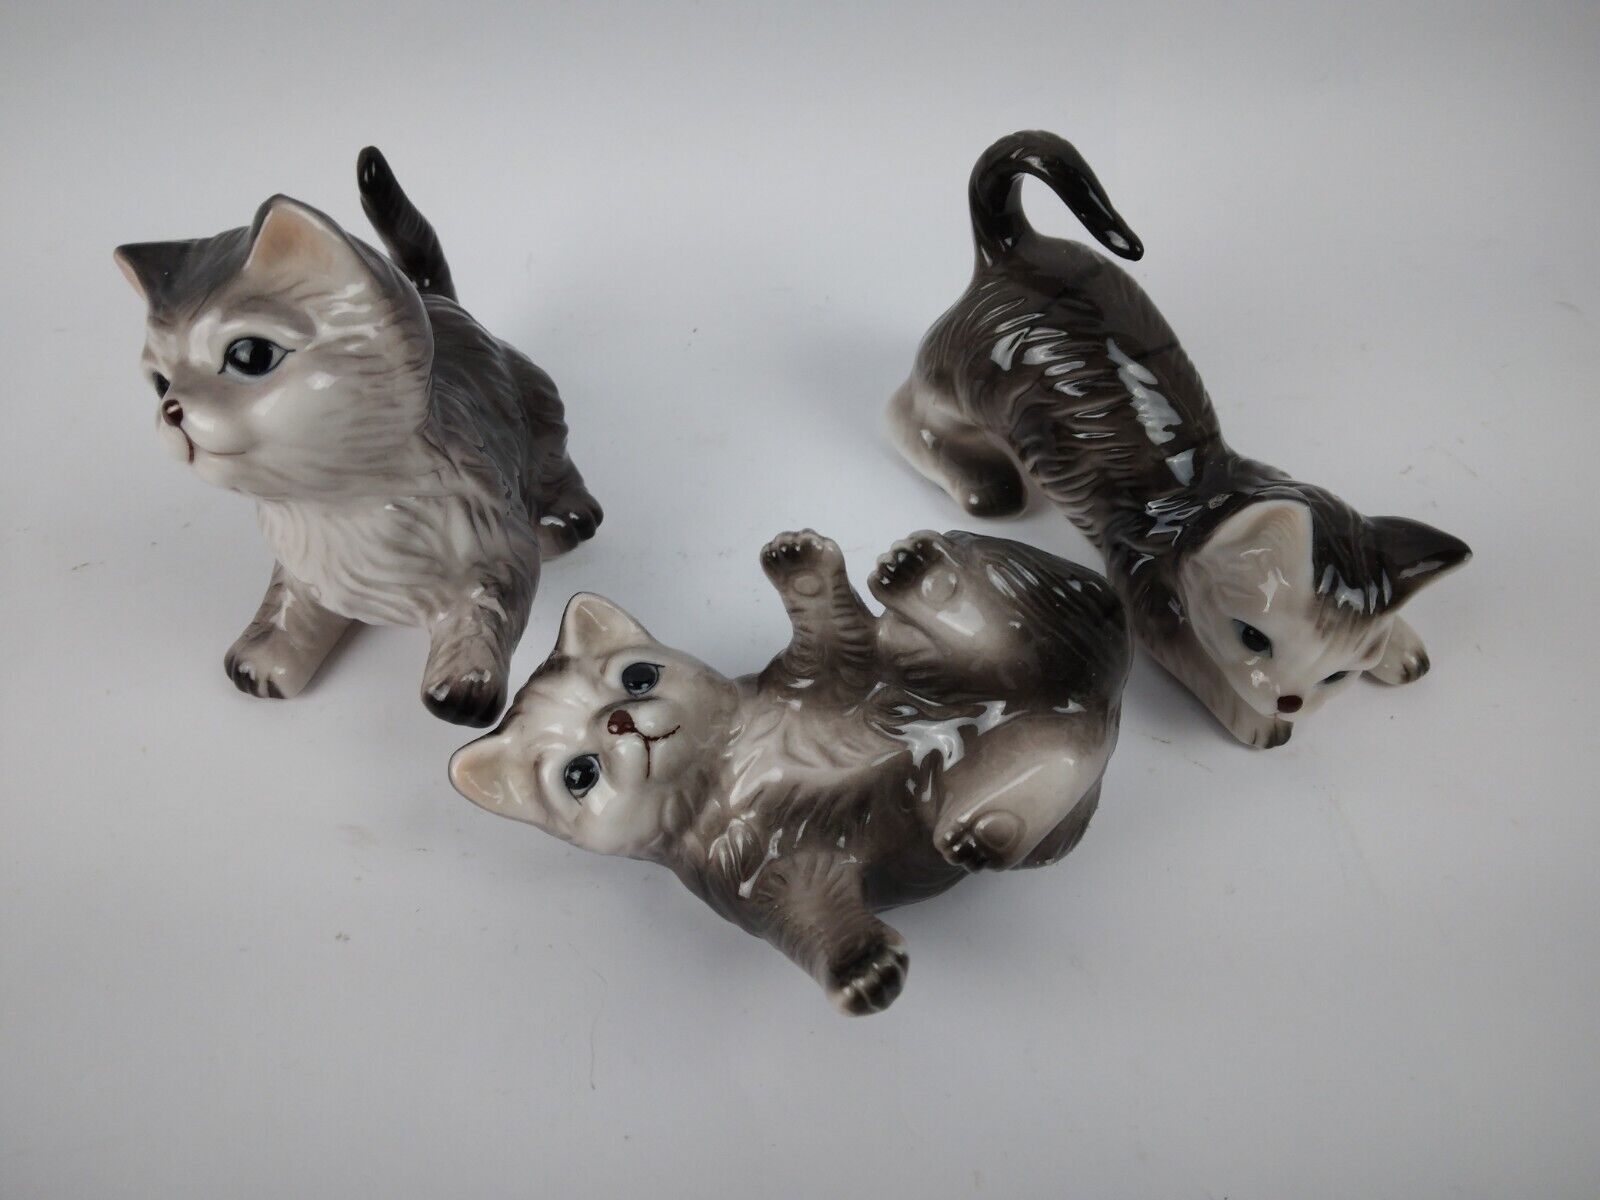 Small Glazed Ceramic Playful Cat Kitten Figurines Lot of 3 Used Cat/Home Decor 